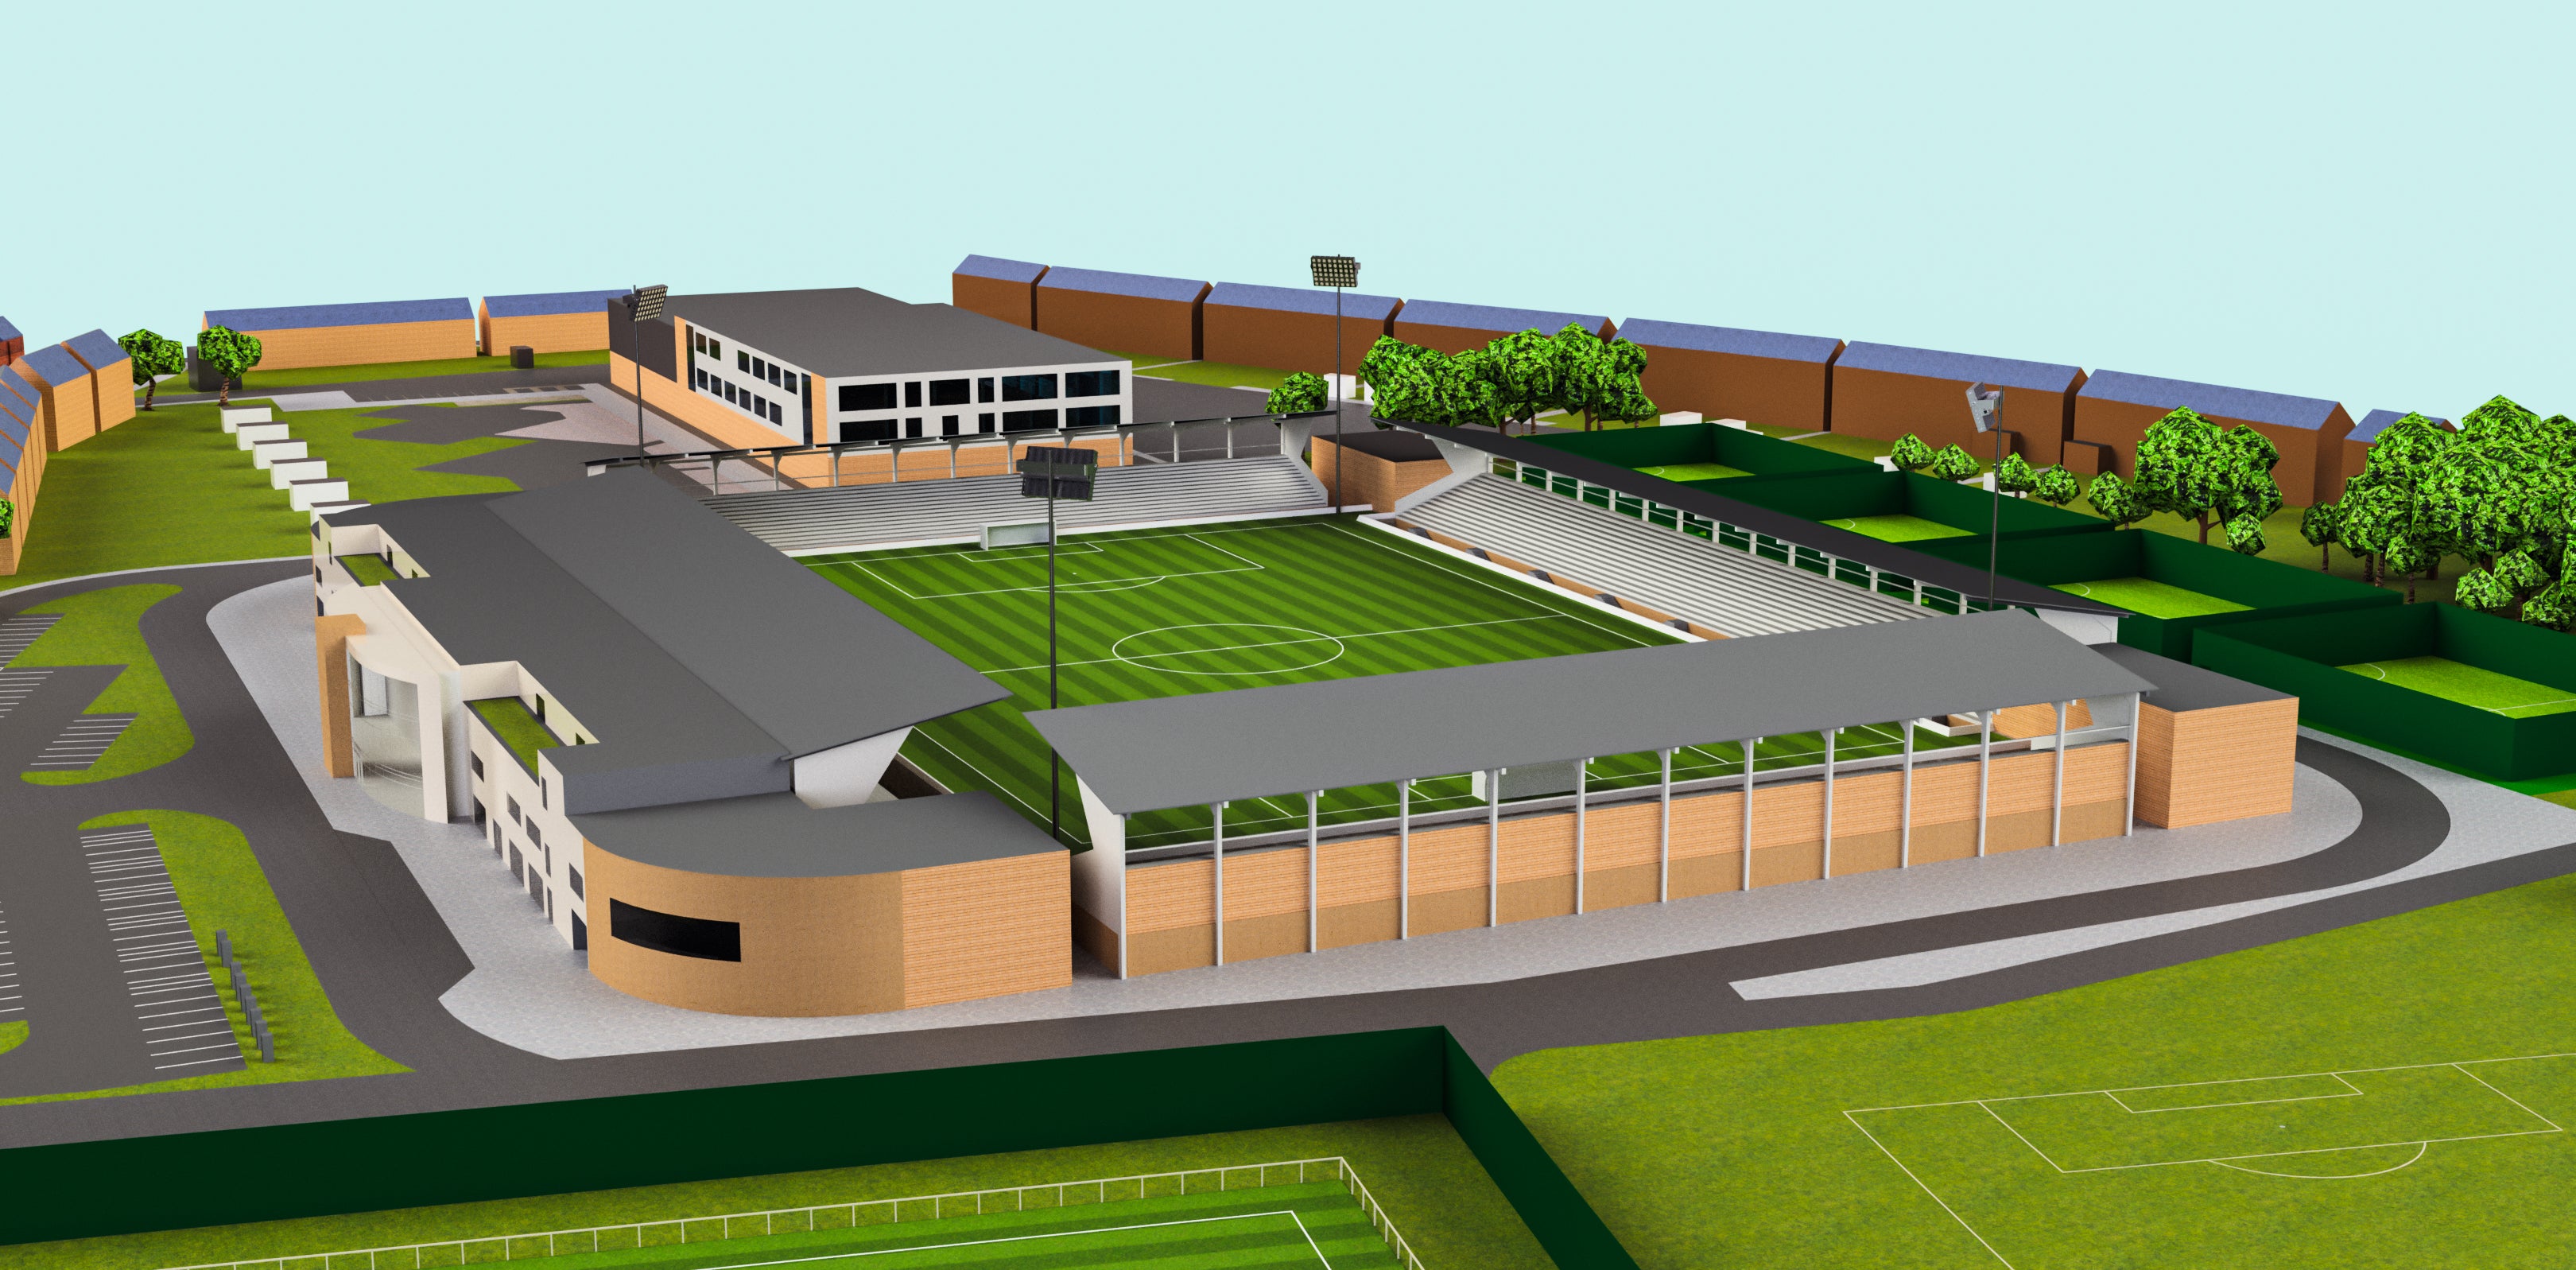 barnet announce plans to build new stadium and end 'ten-year exile' at the hive